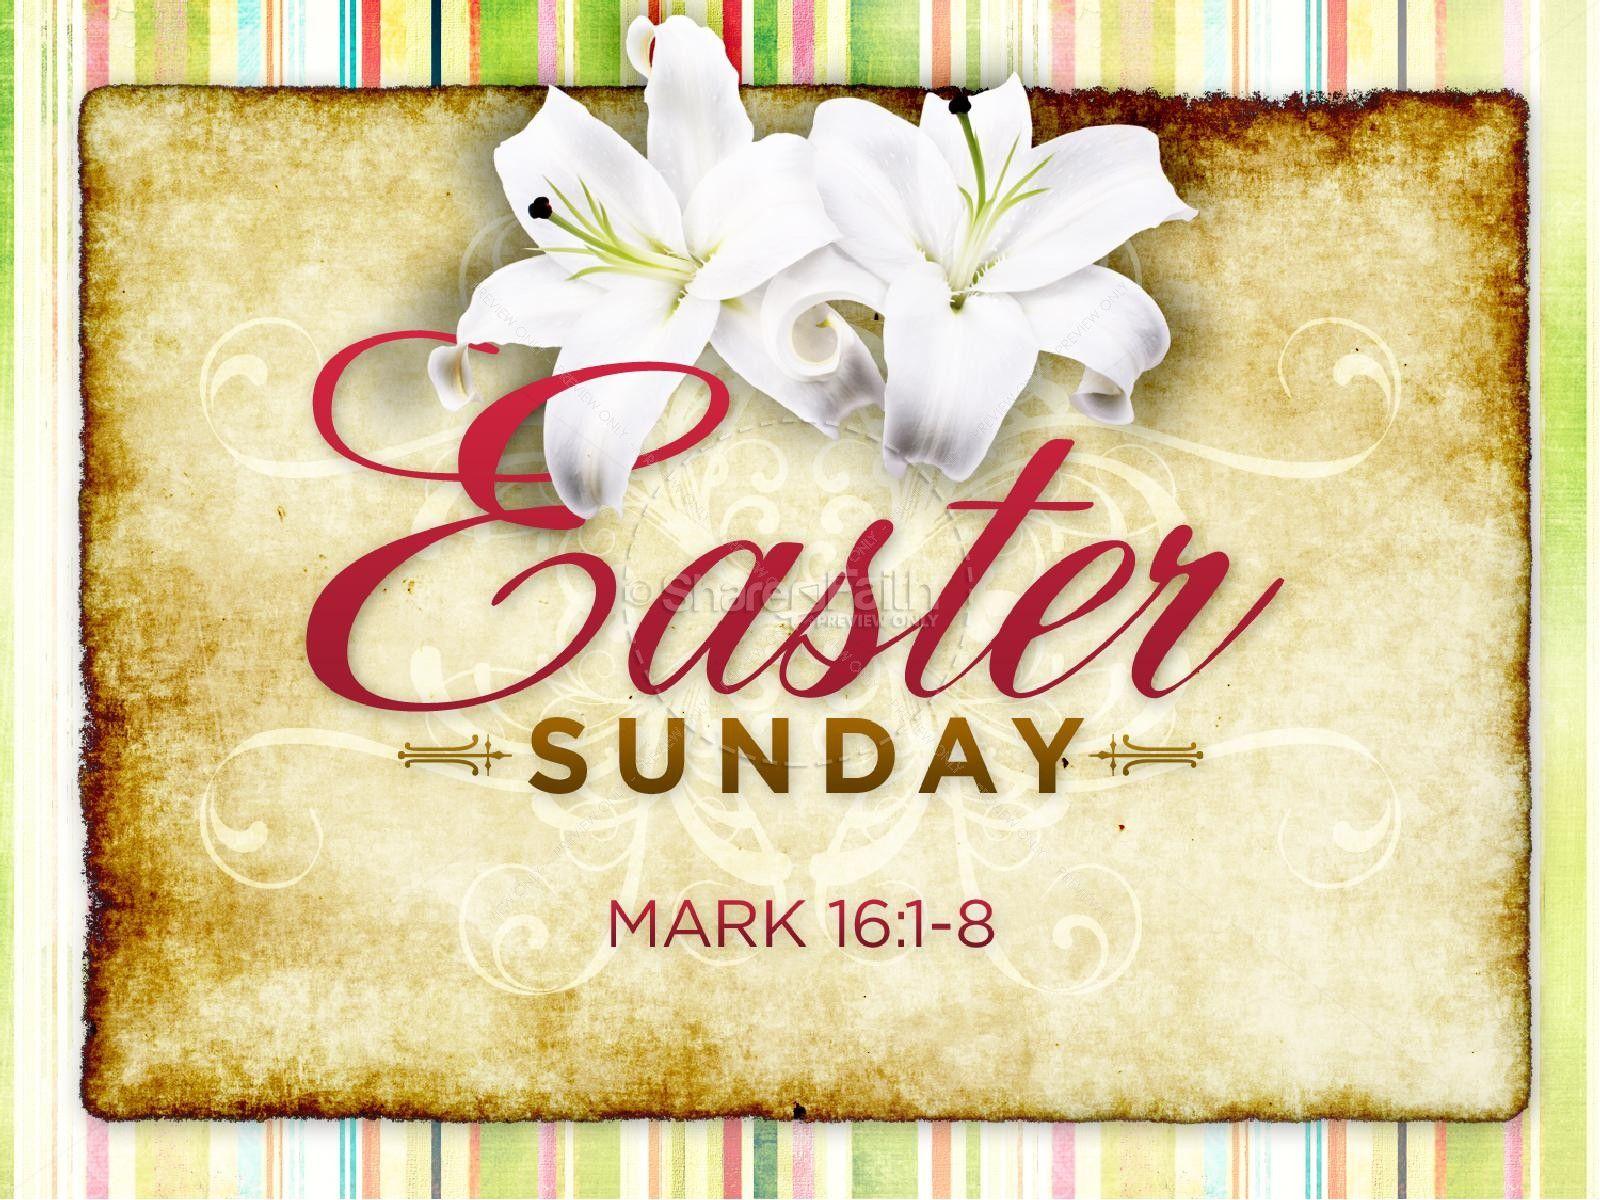 Free Easter Sunday Backgrounds Wallpaper Pictures Wallpapers